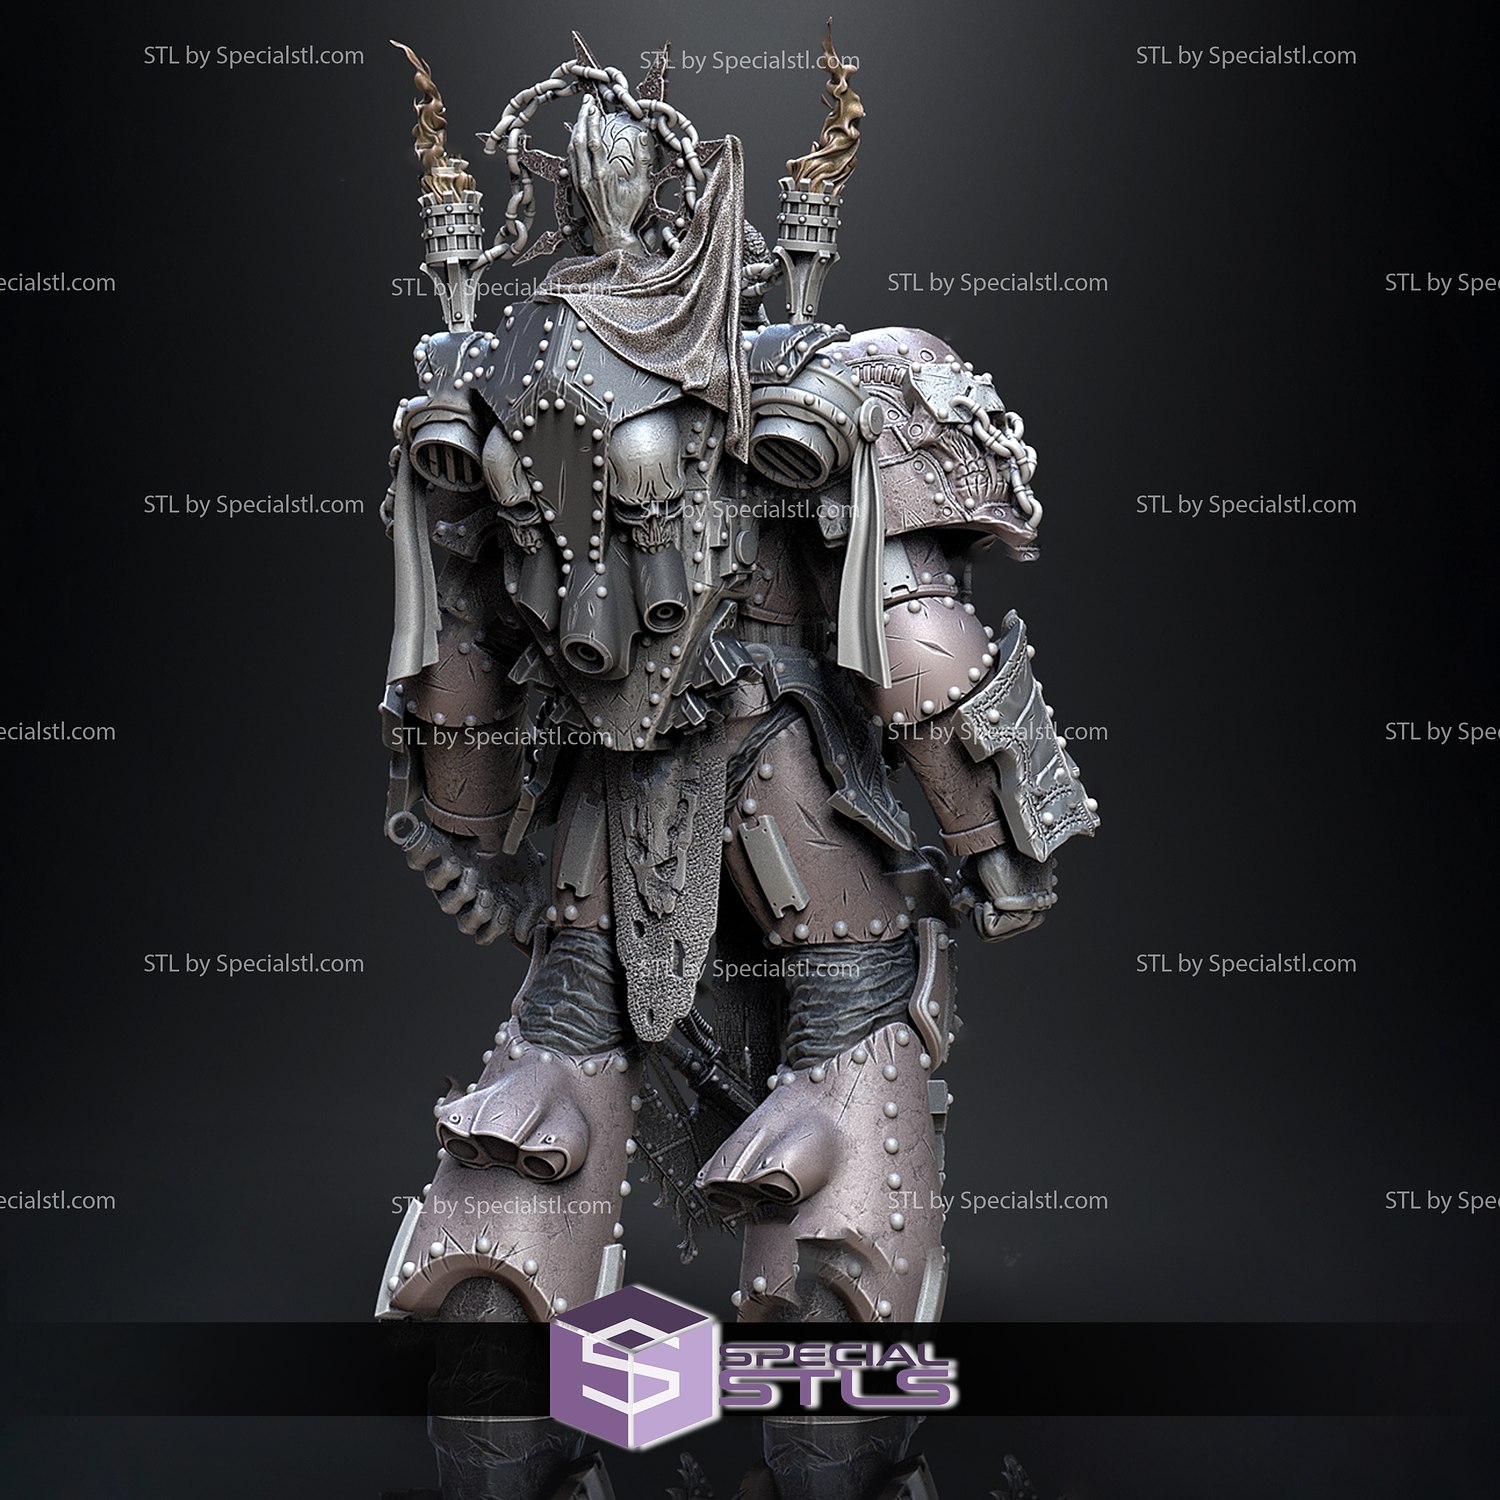 Chaos Colonel Warhammer 40k STL files